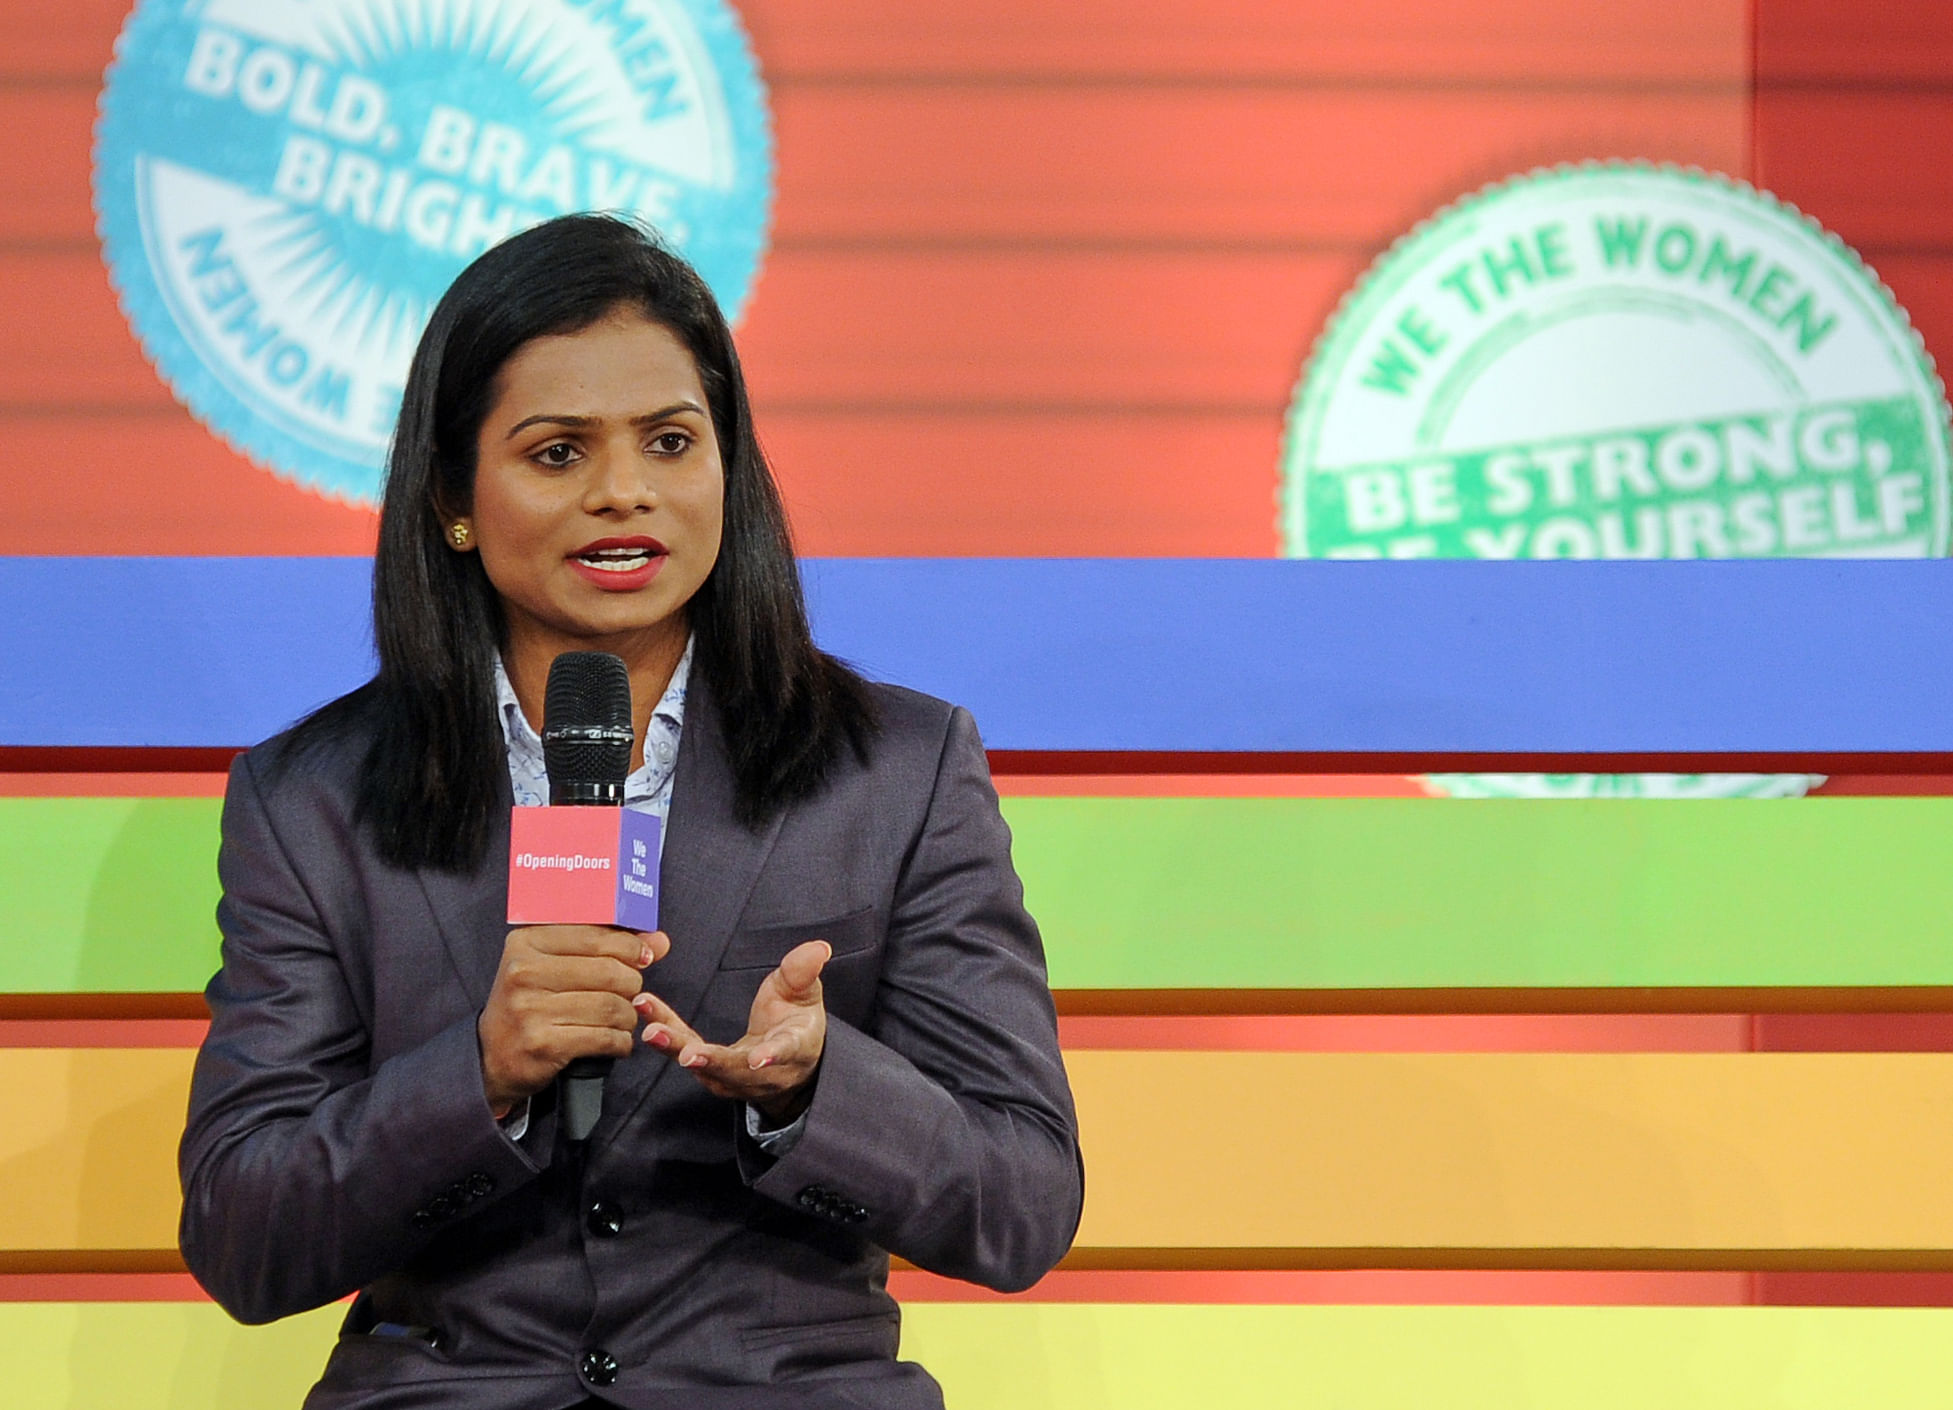 Sprinter Dutee Chand speaks about discrimination women face in sports during We the Women. (DH Photo)